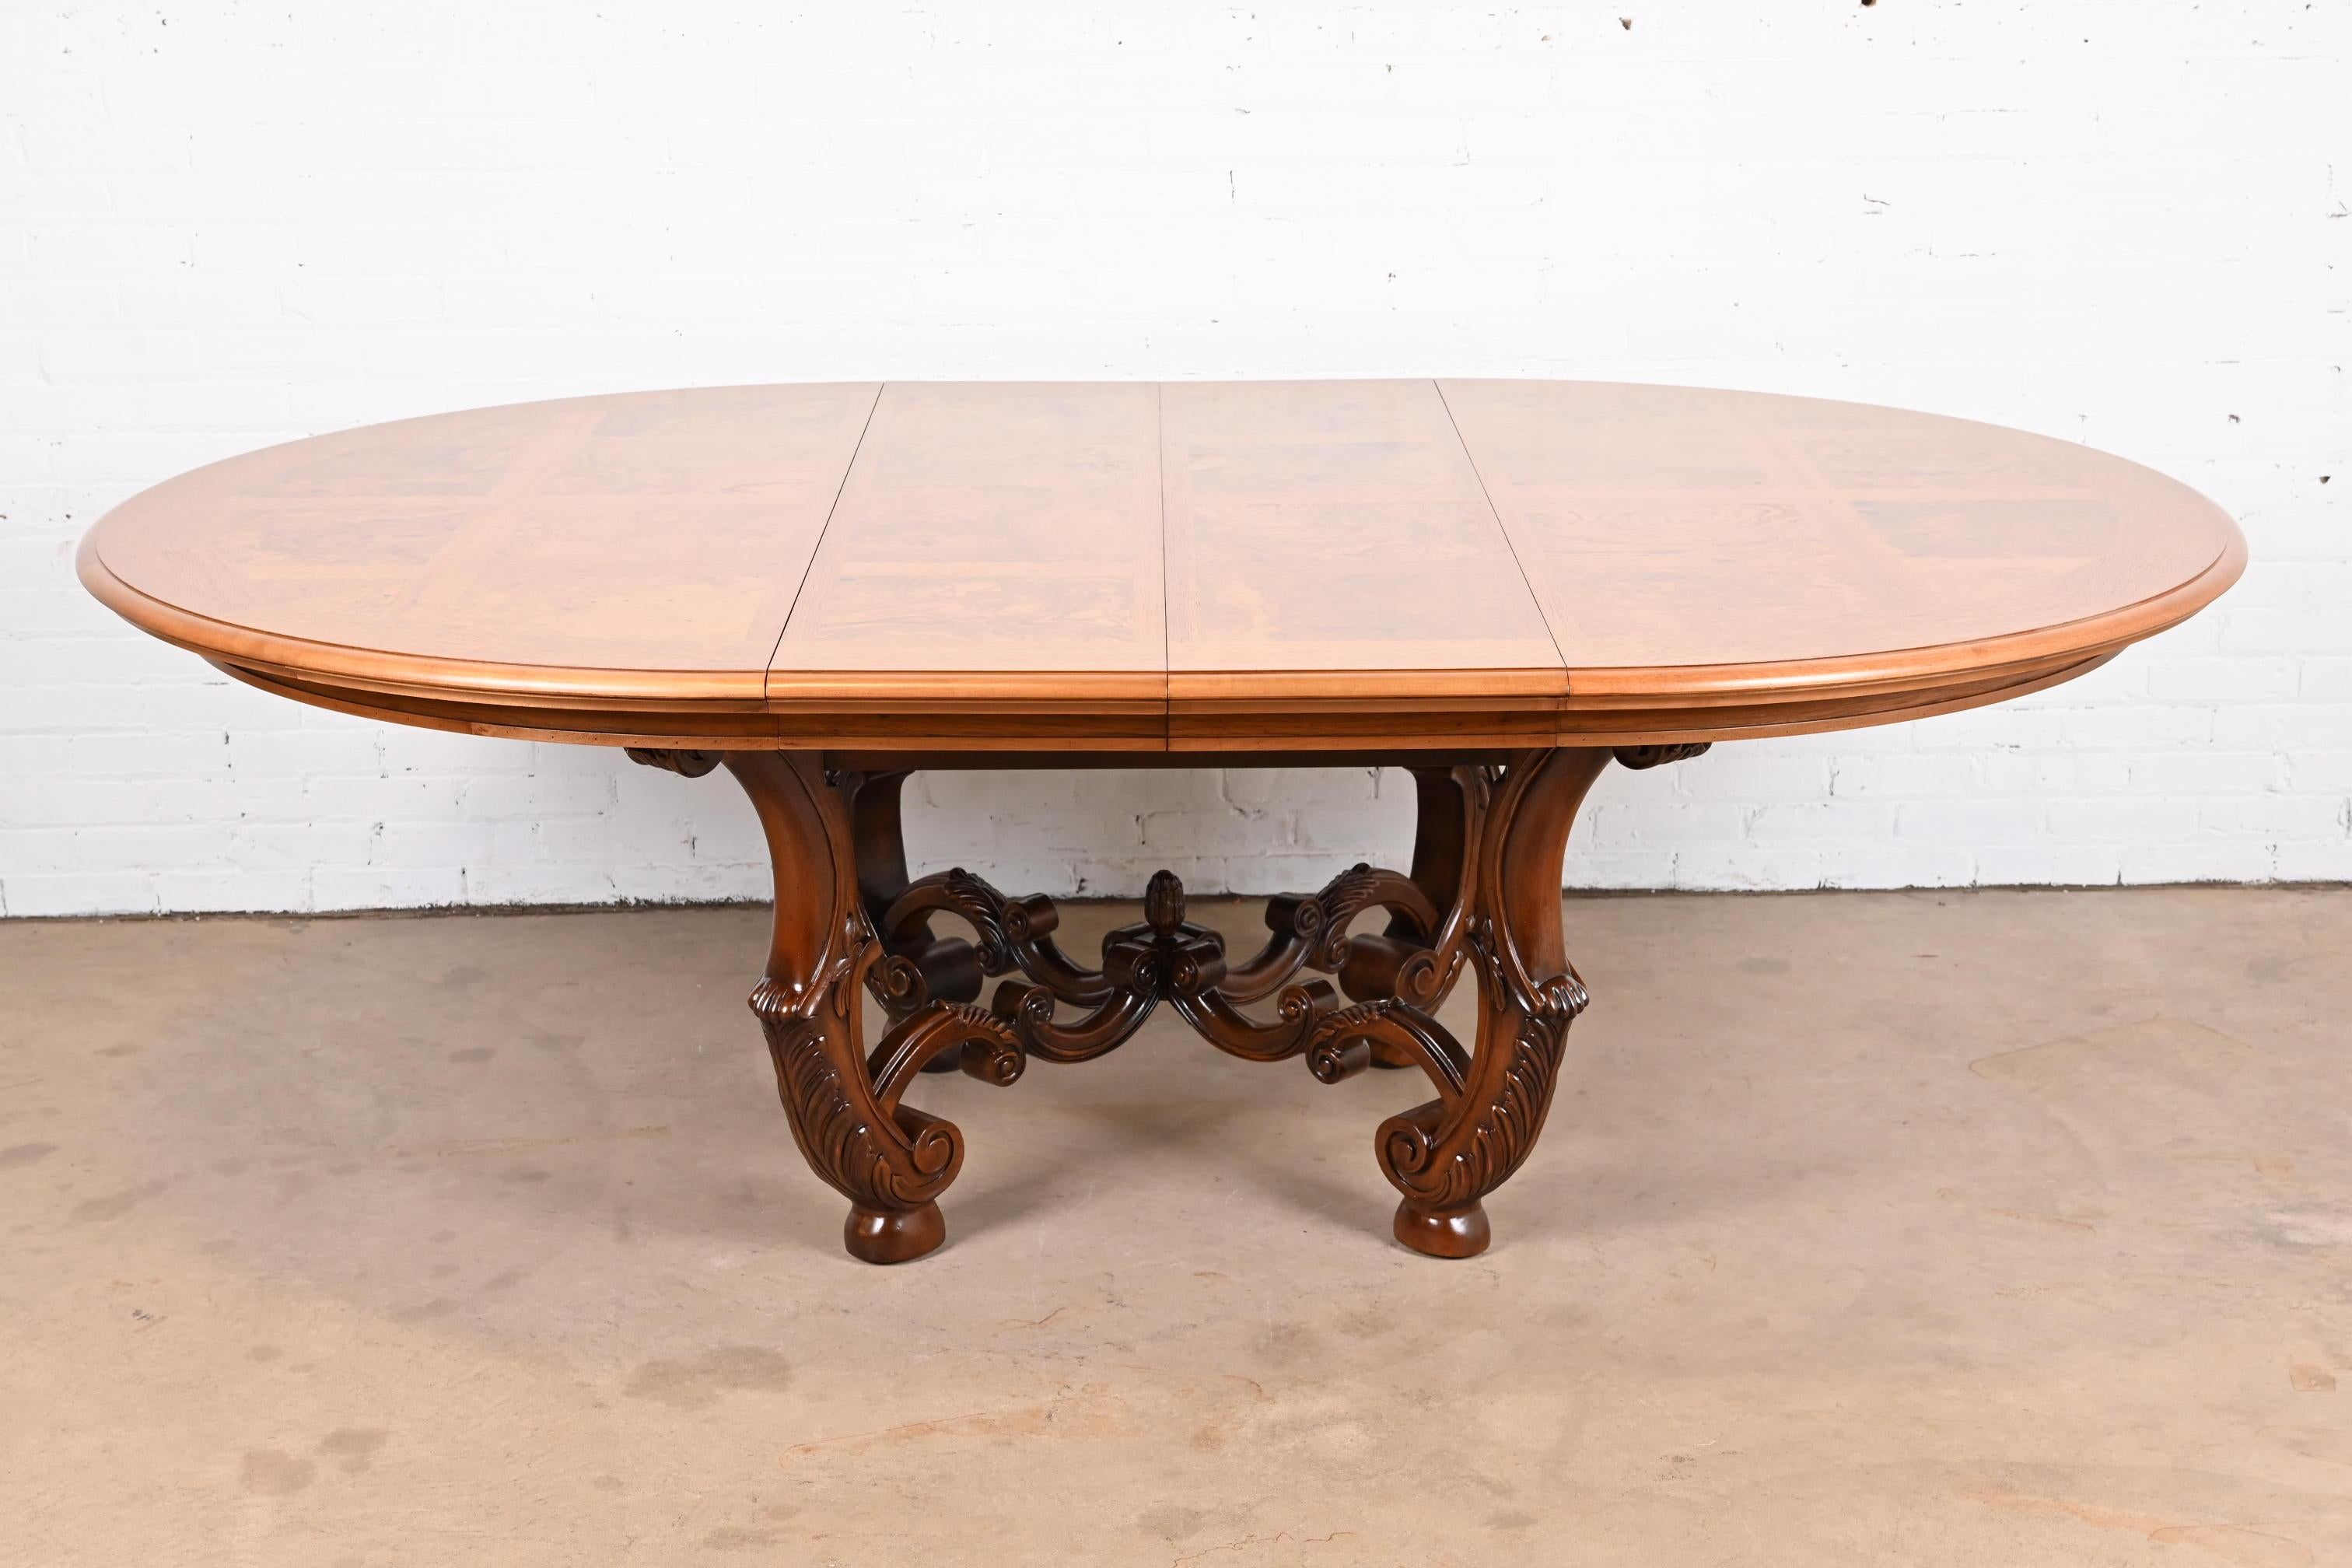 French Provincial Henredon Italian Provincial Carved Walnut and Burl Wood Pedestal Dining Table For Sale